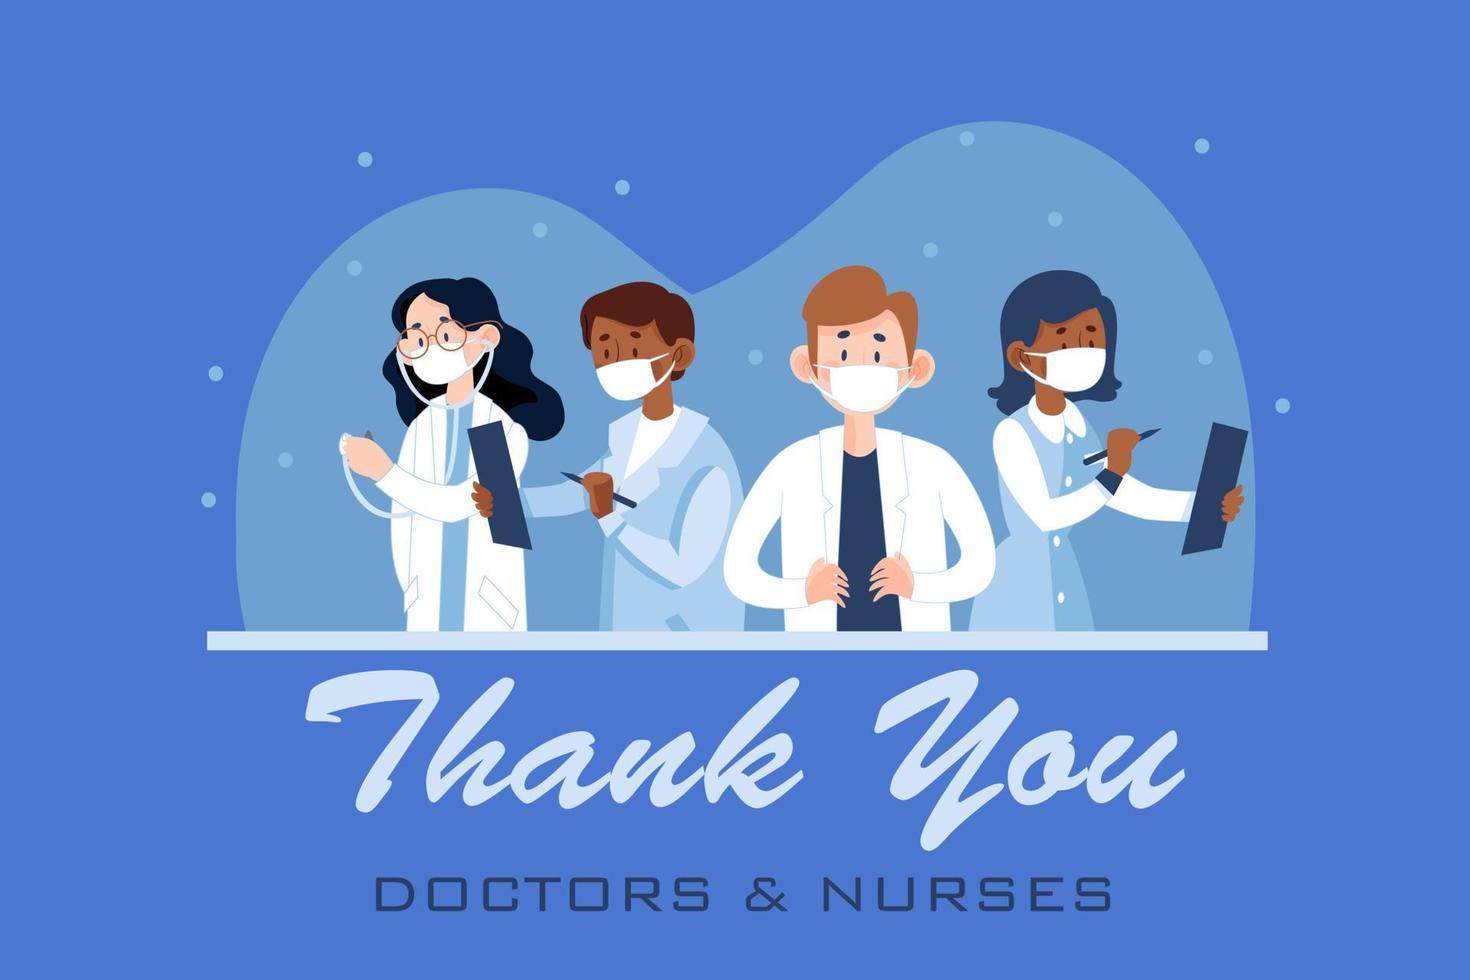 Thank you doctors and nurses Illustration concept. Flat illustration isolated on white background vector